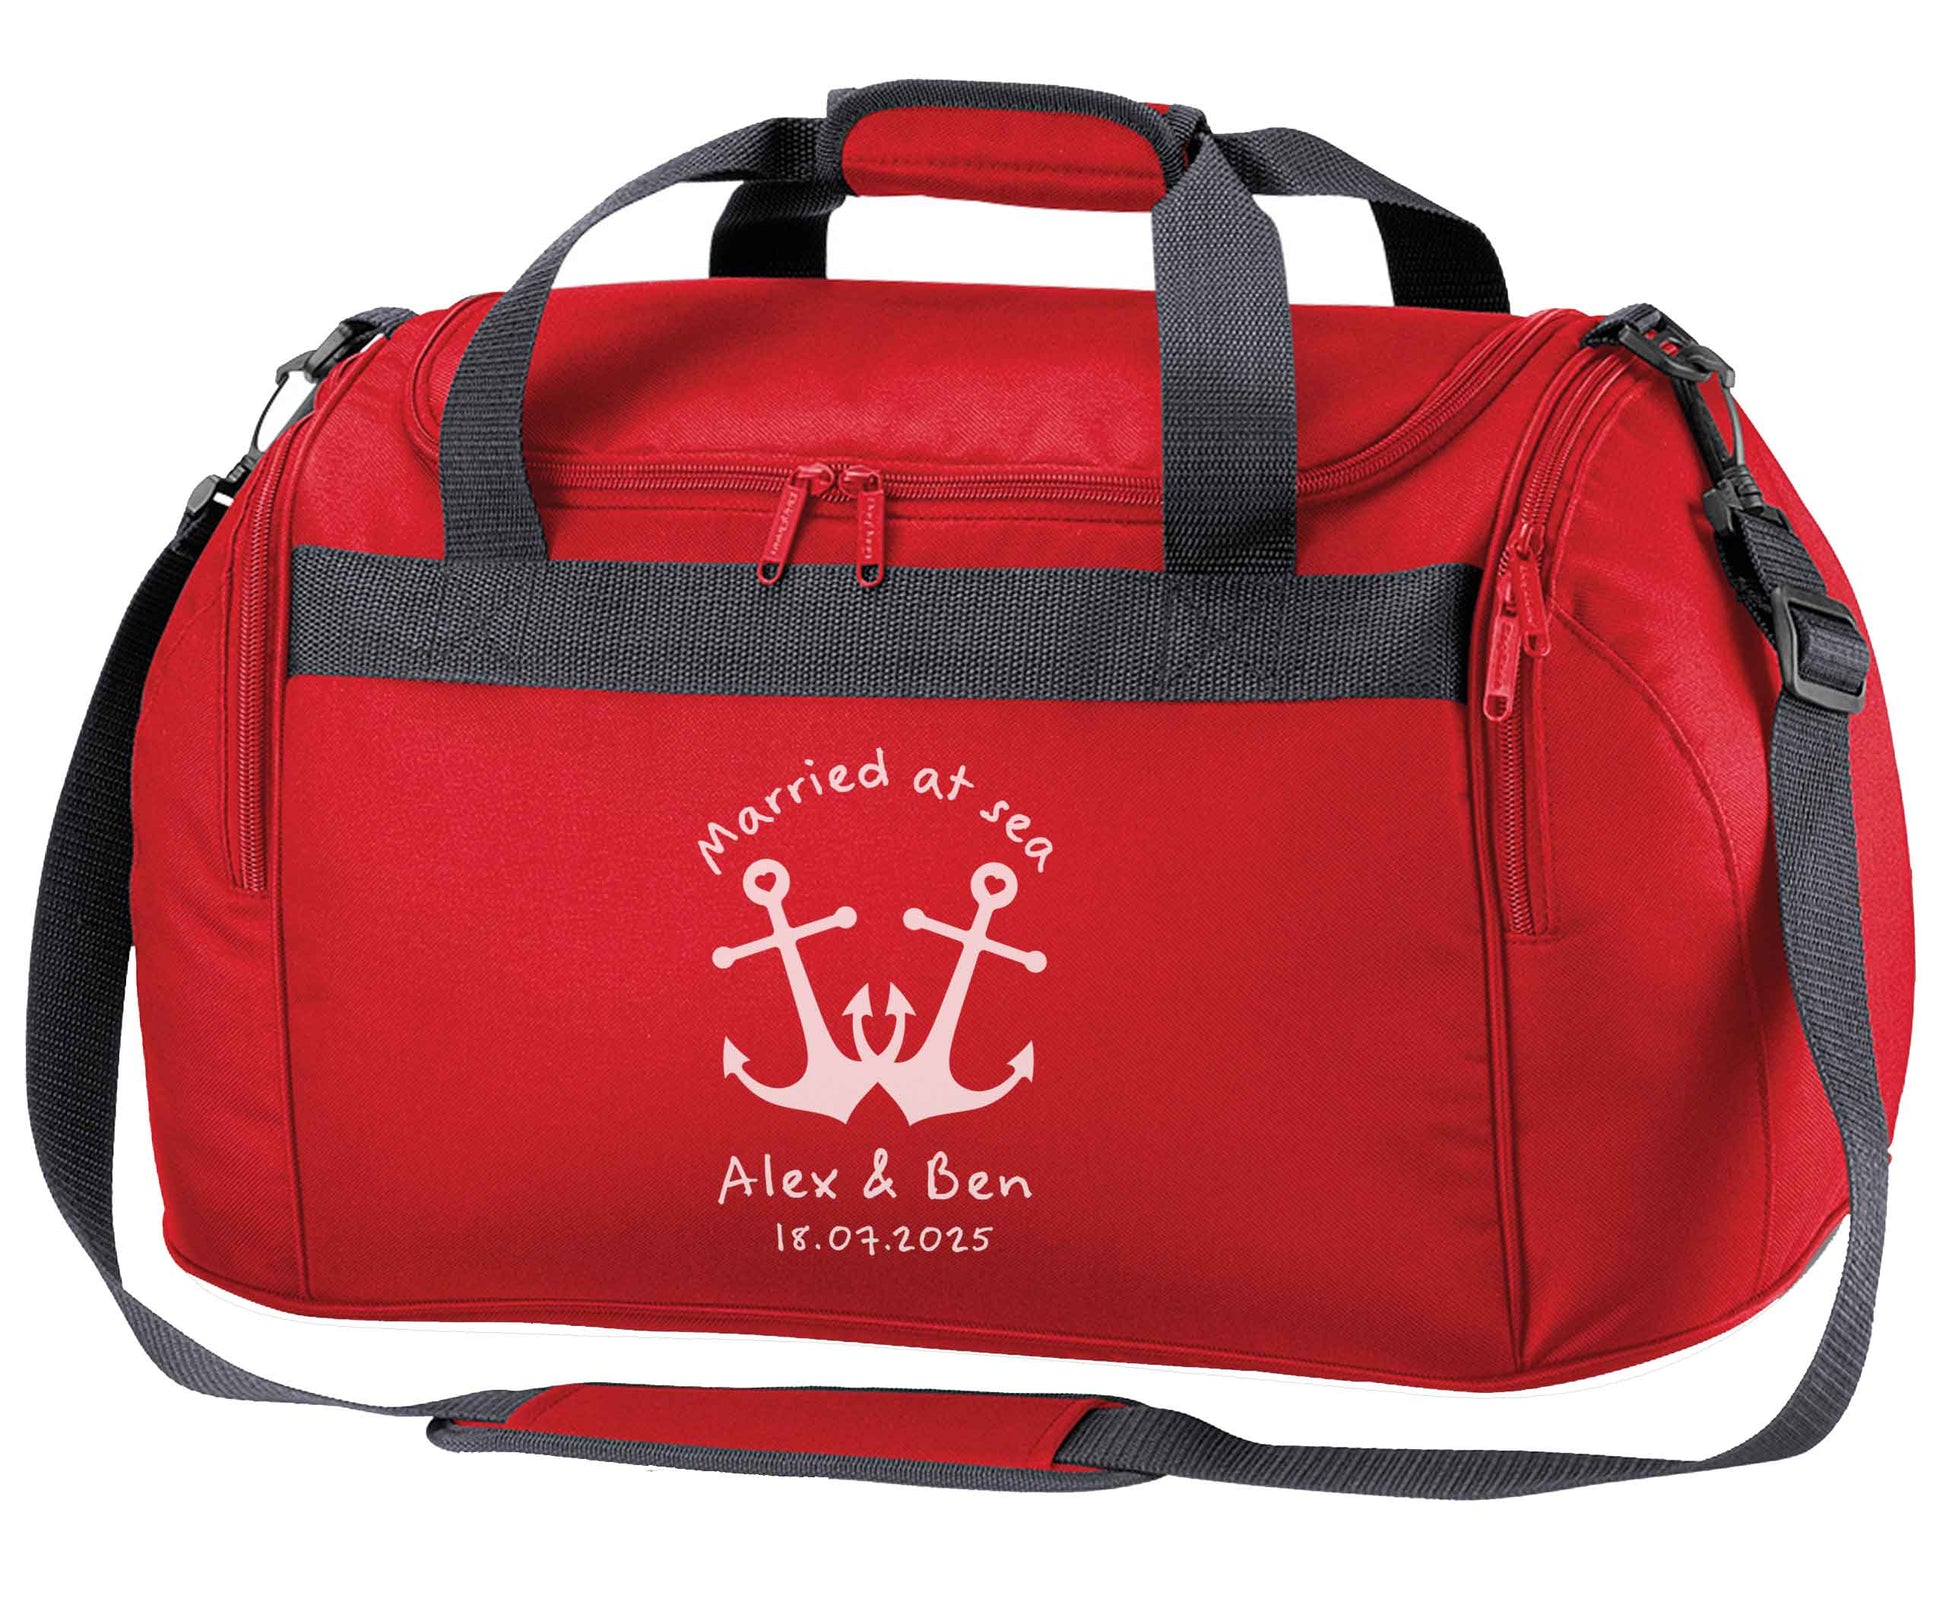 Married at sea blue anchors red holdall / duffel bag